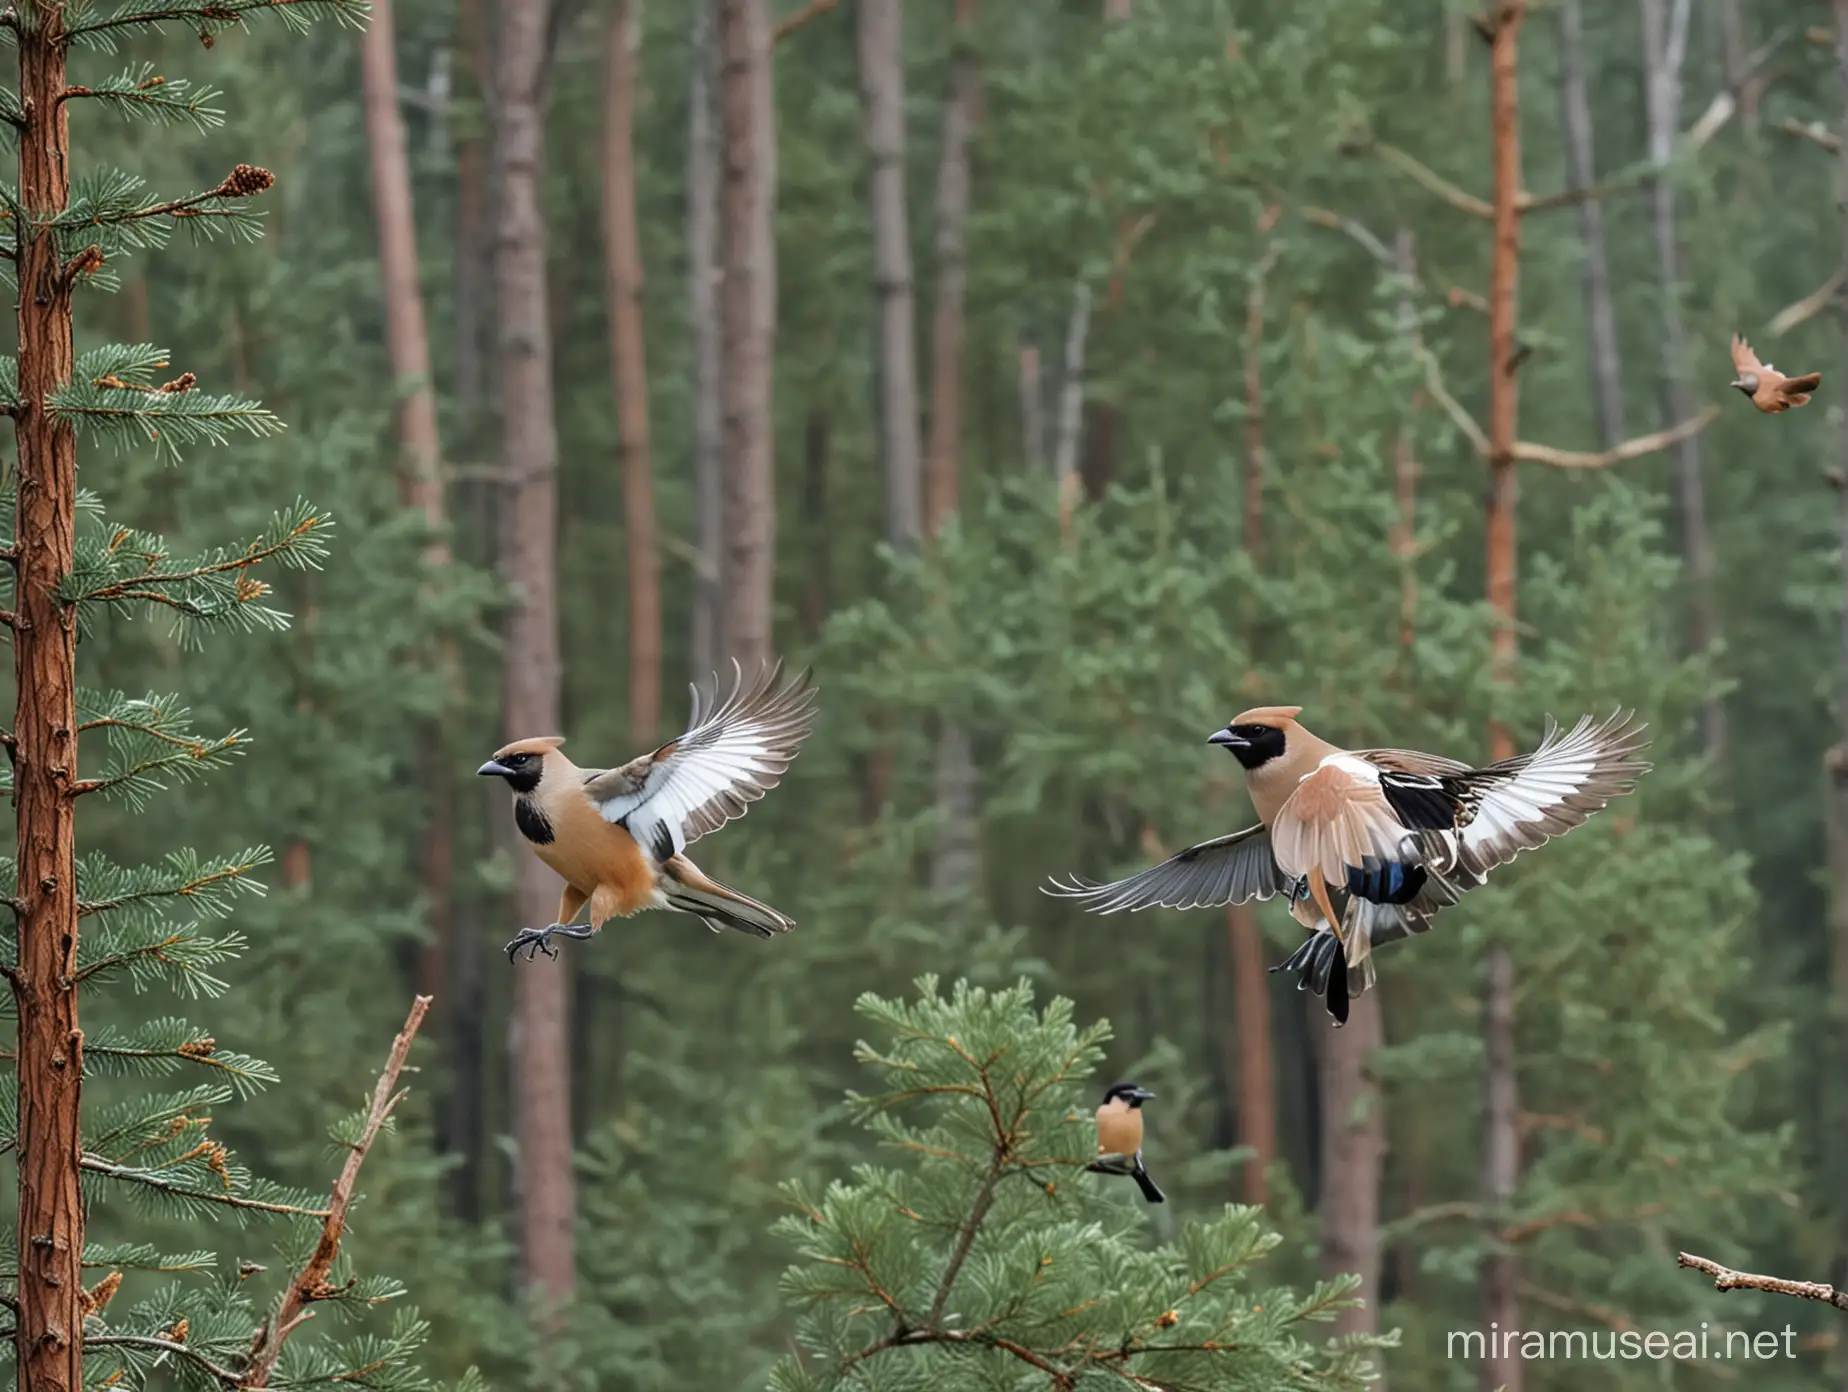 Photo. A cross between two birds - a Siberian jay and a European magpie - flies in a spruce forest.